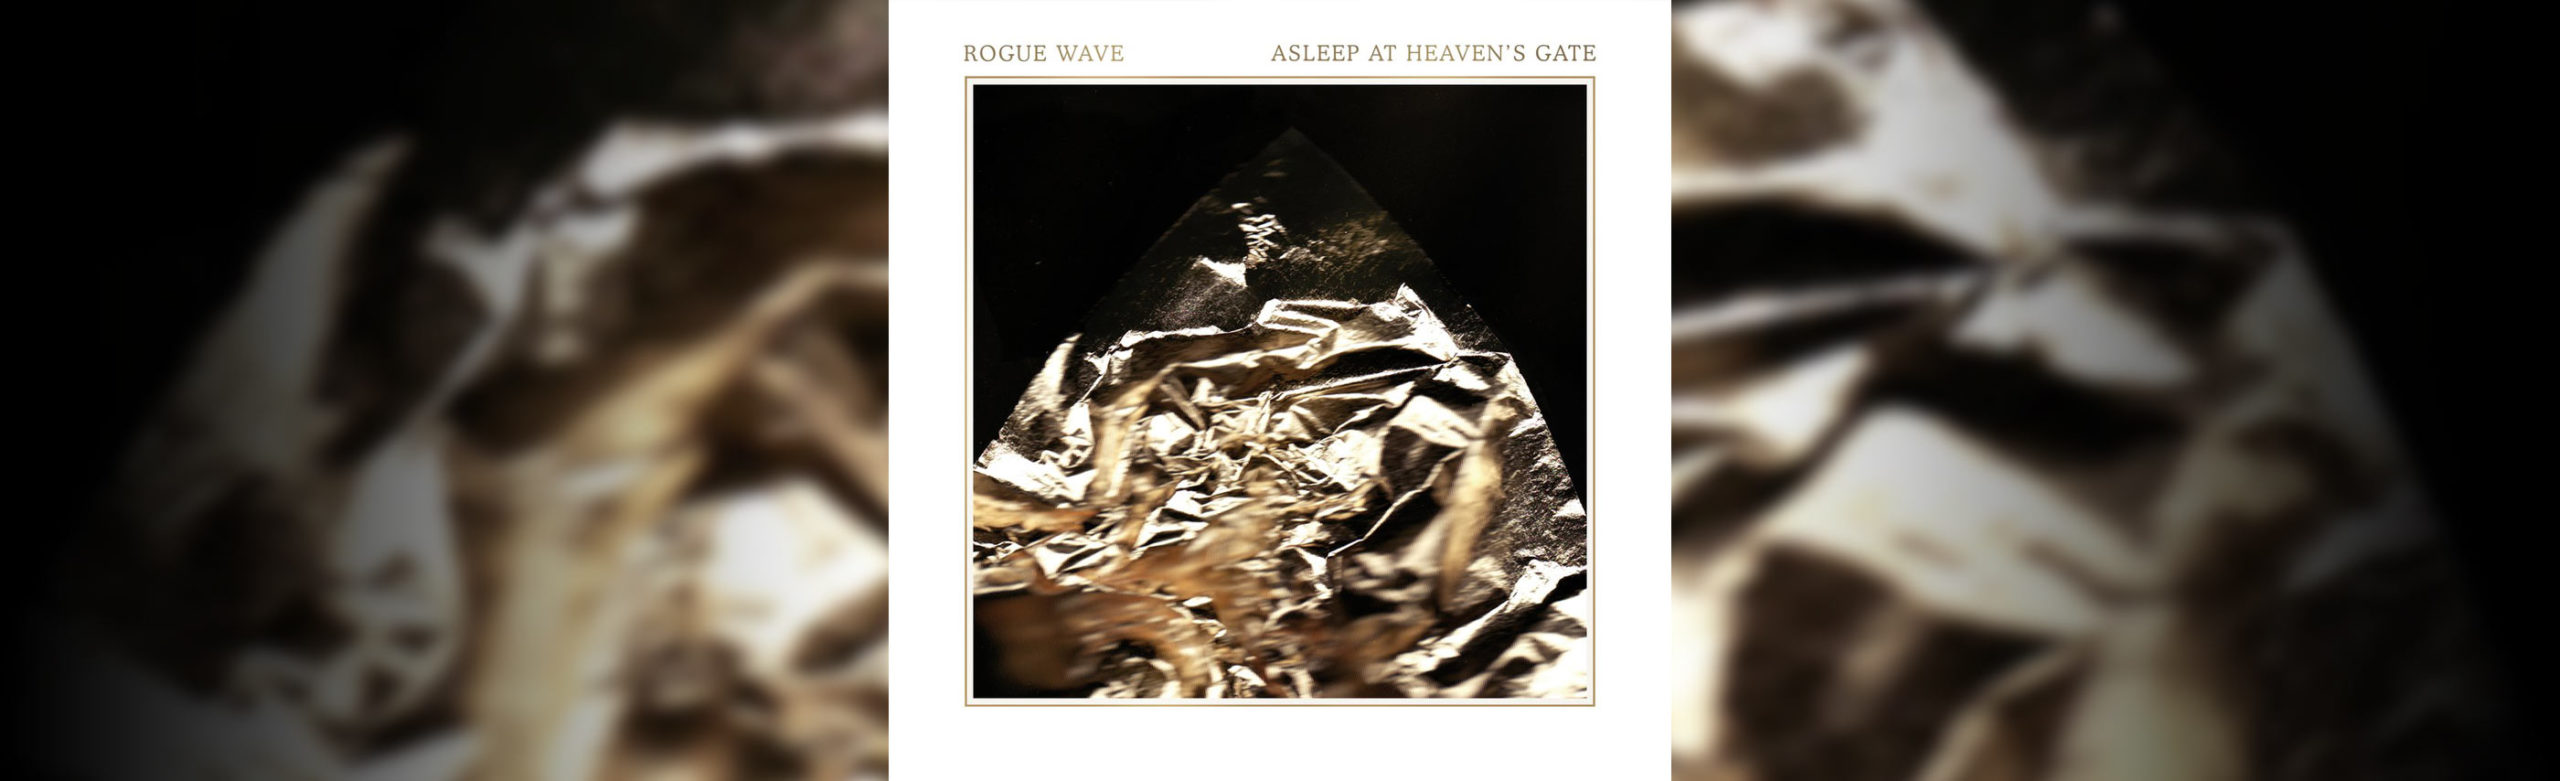 GIVEAWAY: Rogue Wave Tickets + Autographed CD Image